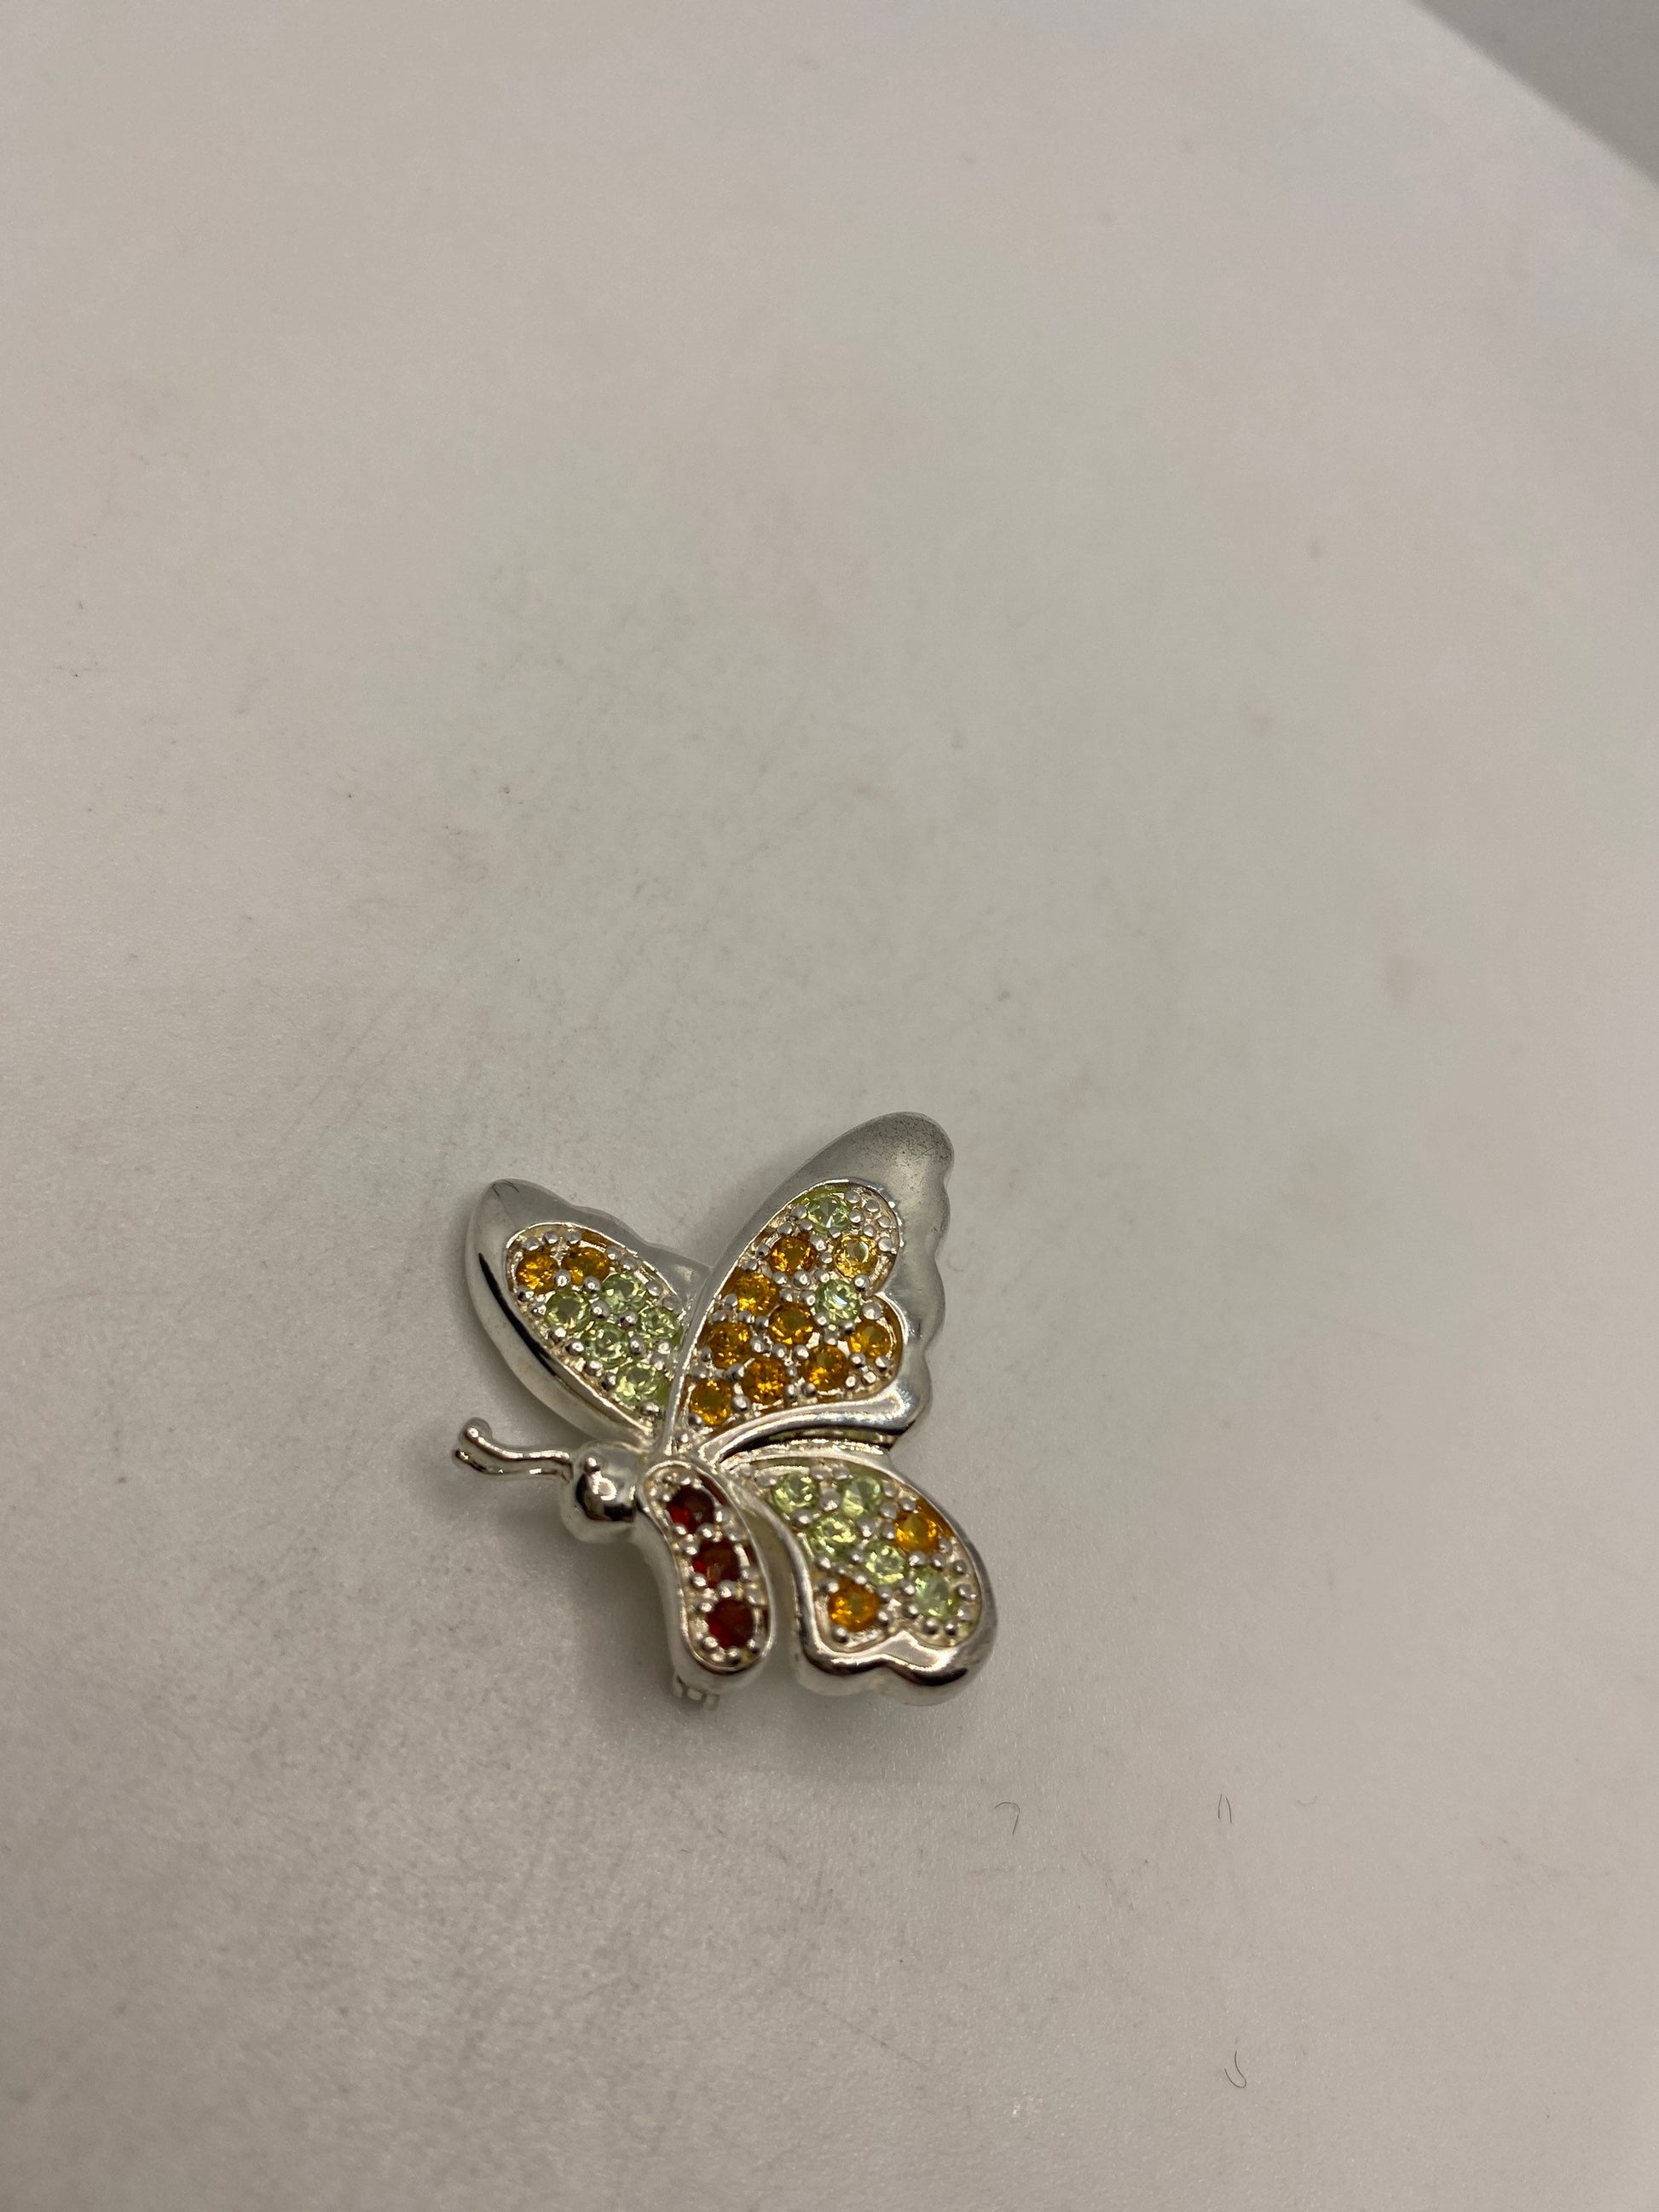 Vintage Citrine Peridot and Garnet pin 925 Sterling Silver Butterfly Brooch